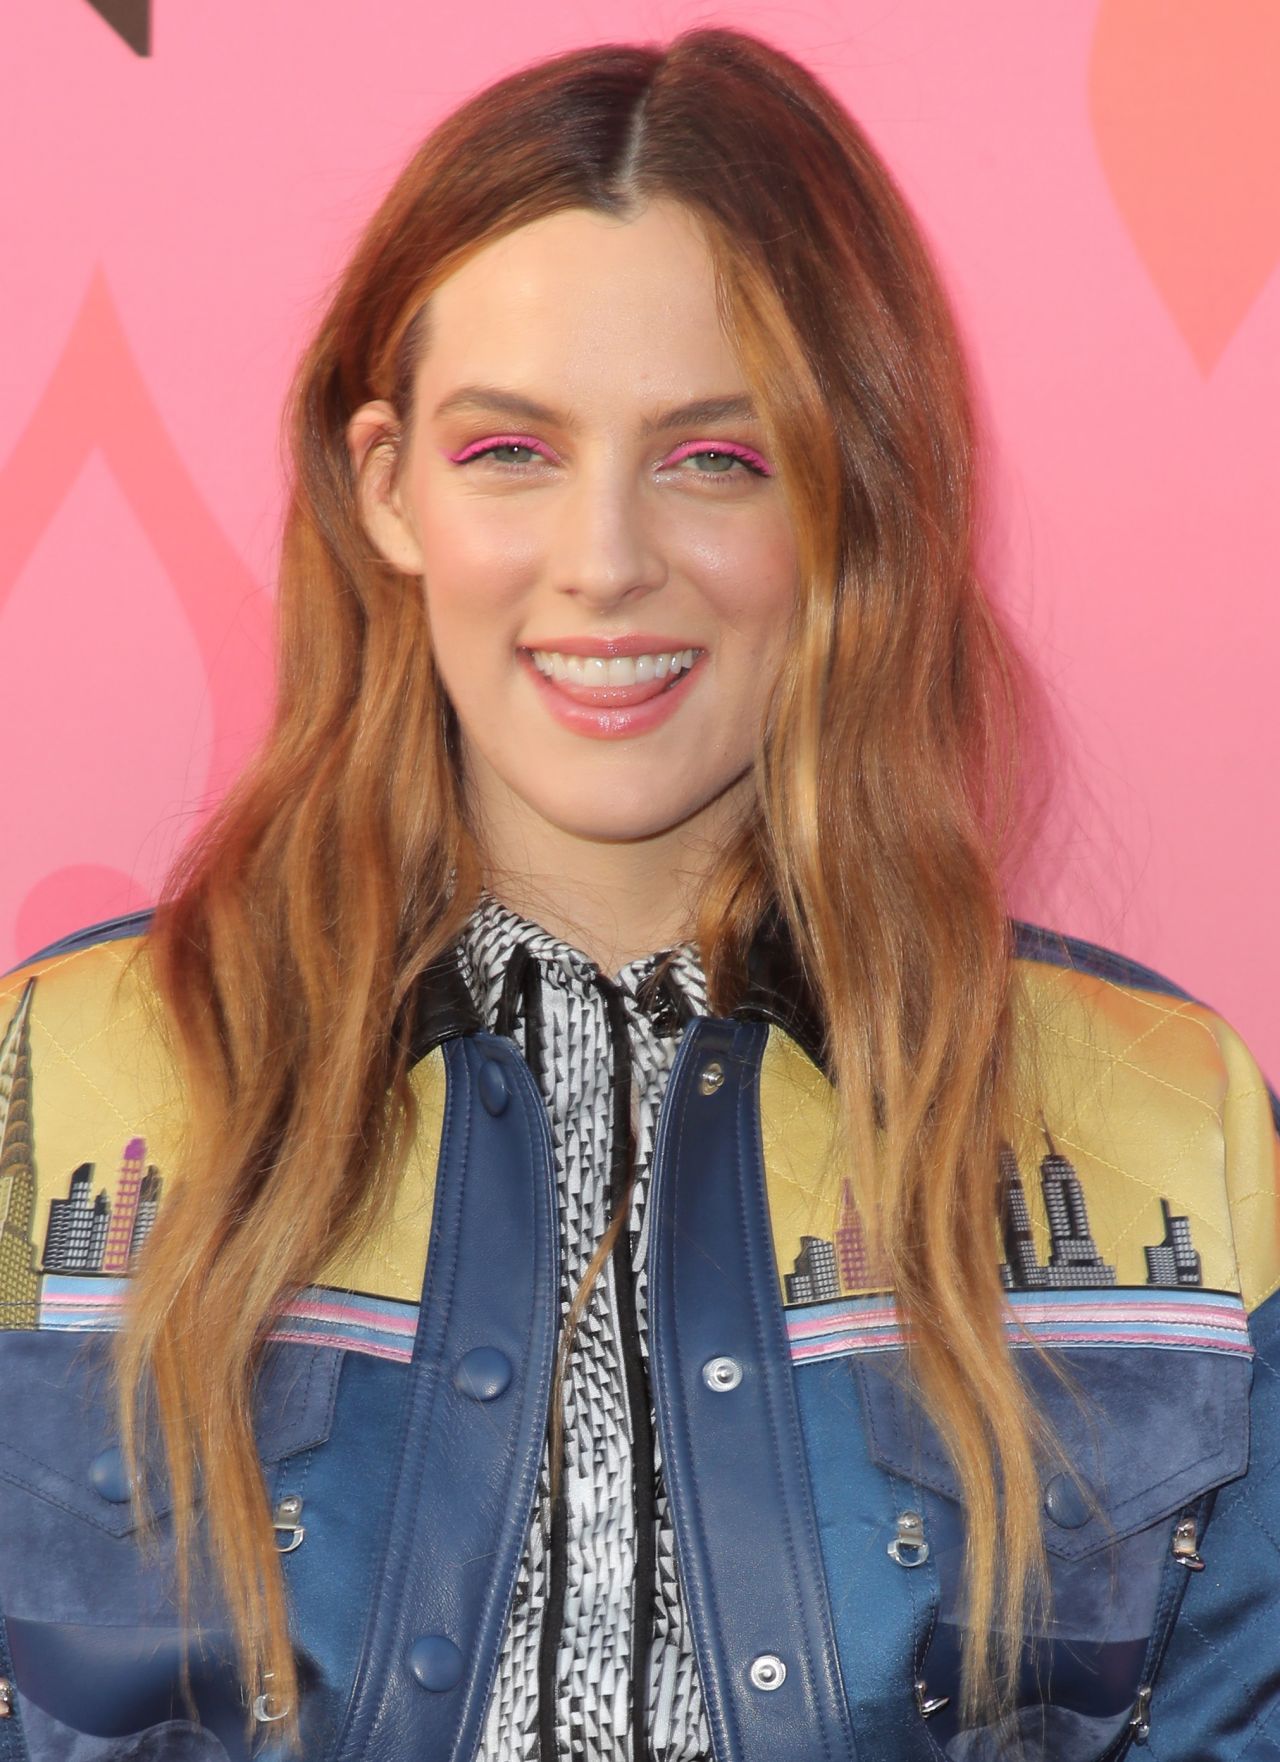 Riley Keough - Louis Vuitton X Opening Cocktail Party in Beverly Hills 06/27/2019